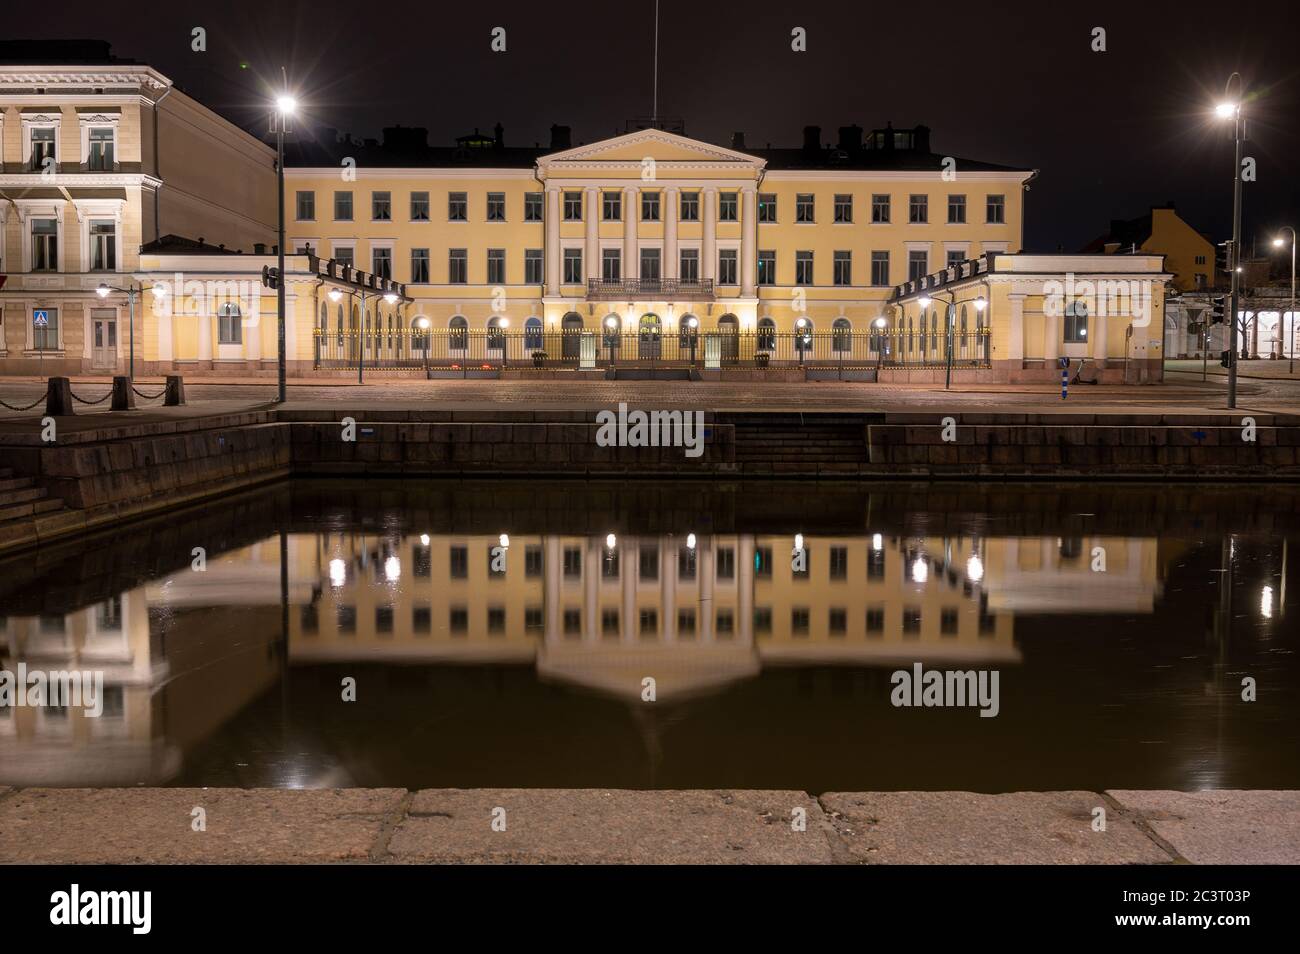 Helsinki / Finland - April 24, 2020: The presidential palace of finnish president located in downtown Helsinki photographed during nighttime. Stock Photo